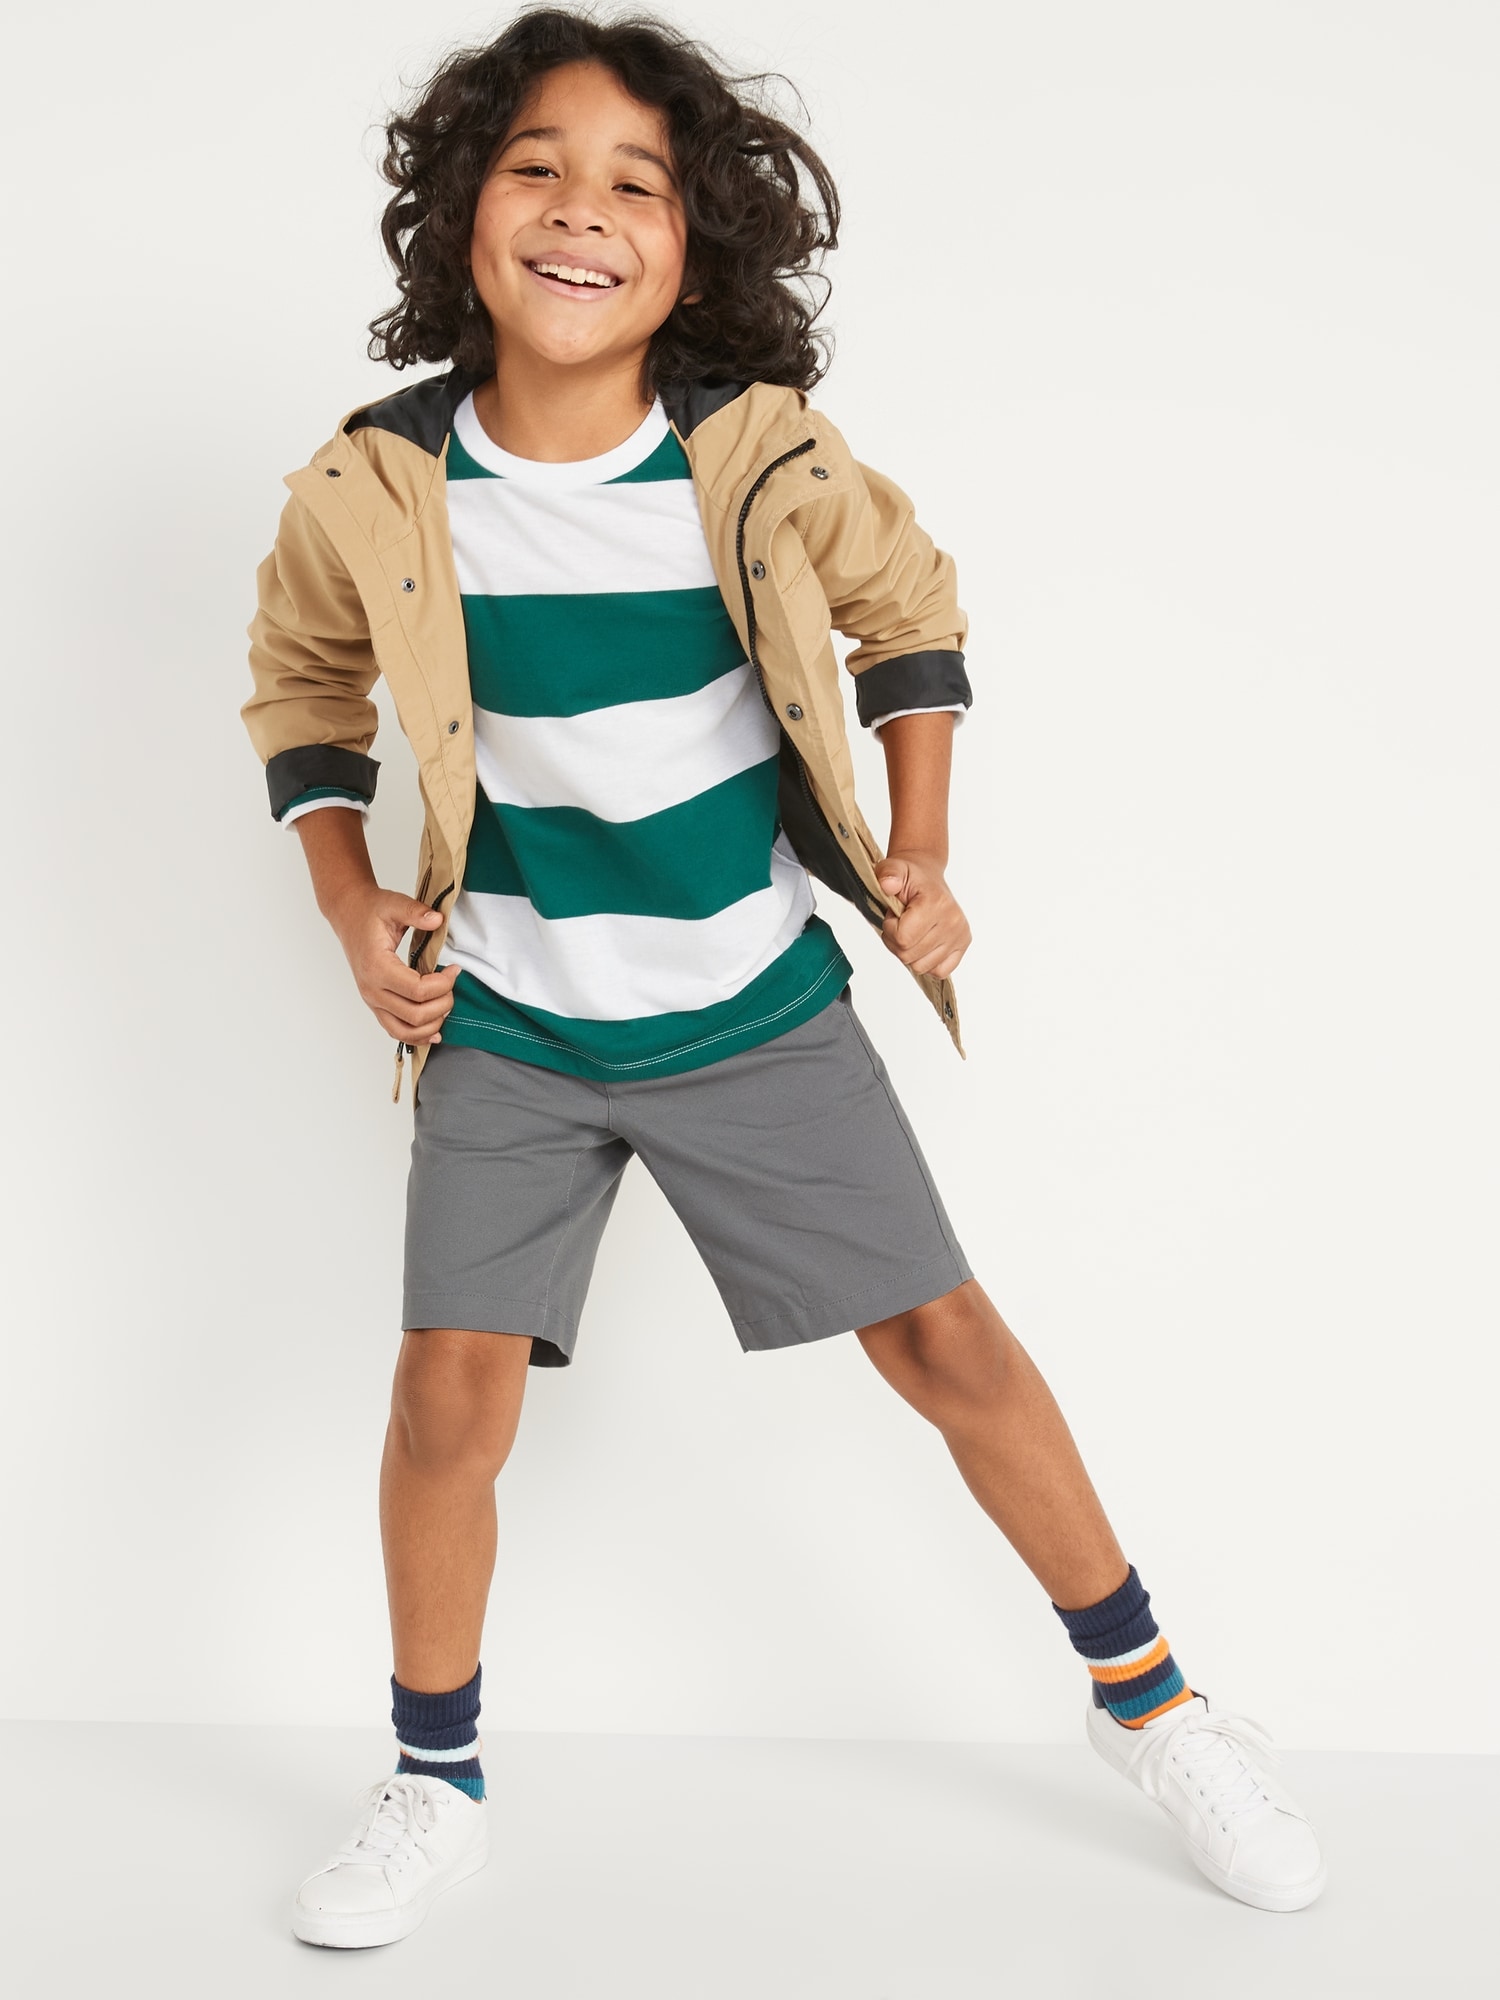 Old Navy - Built-In Flex Straight Twill Shorts for Boys (At Knee)